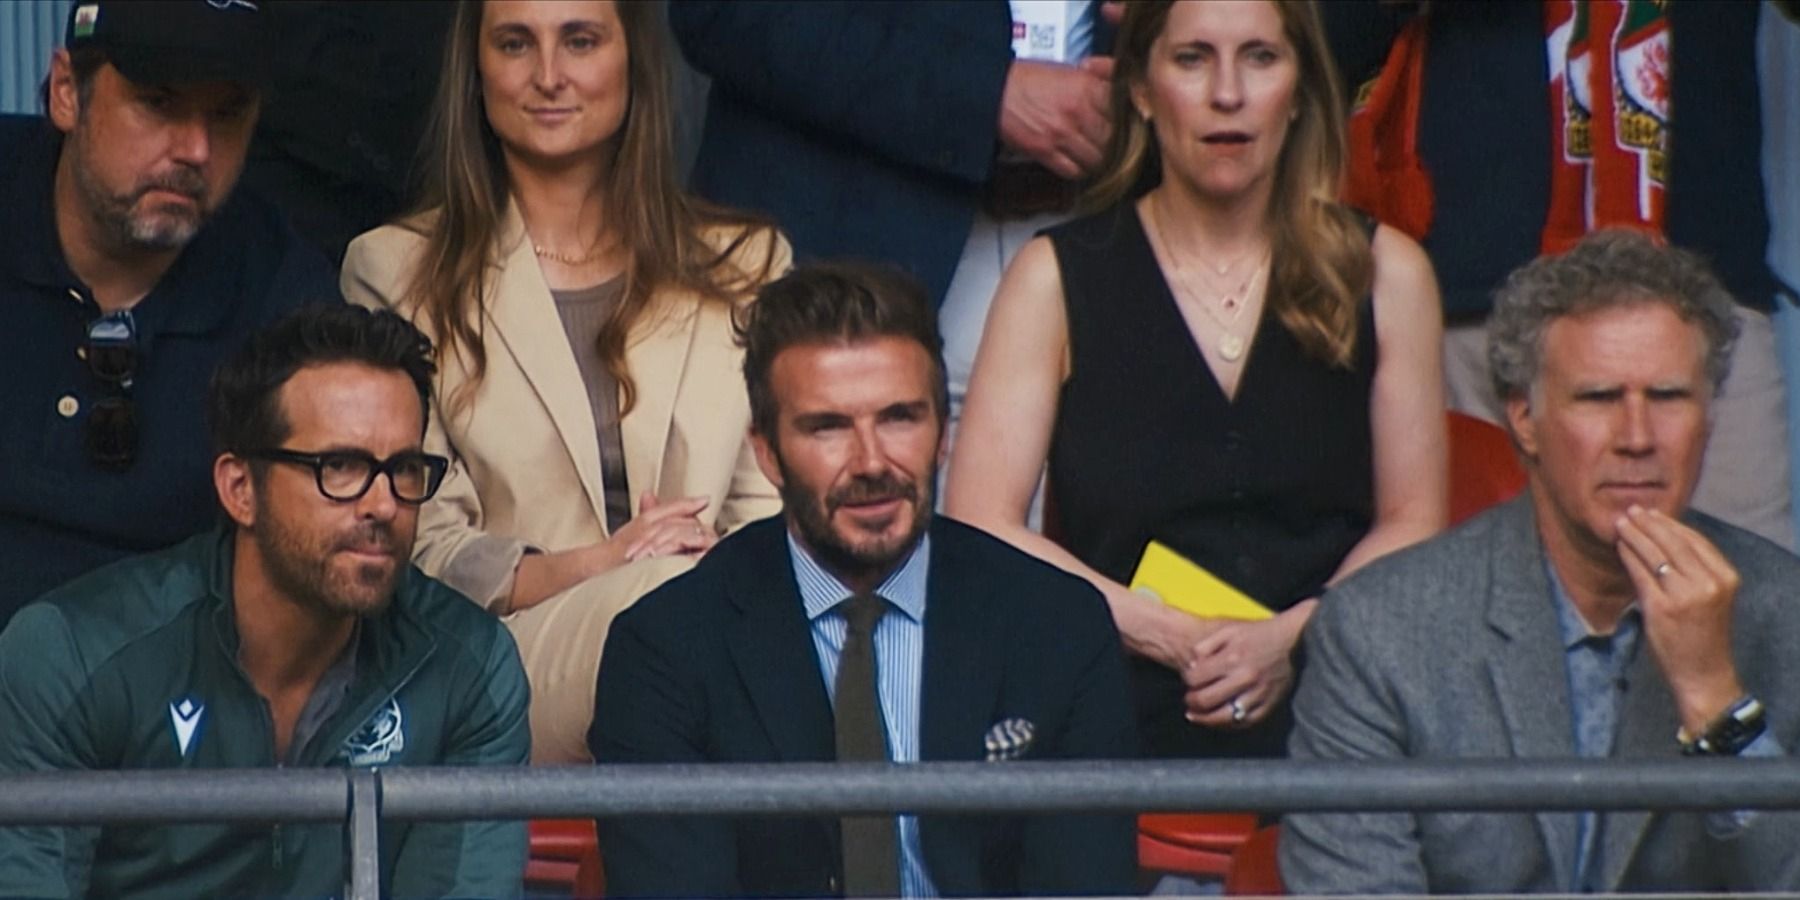 Ryan Reynolds David Beckham and Will Ferrell in owners box Welcome to Wrexham